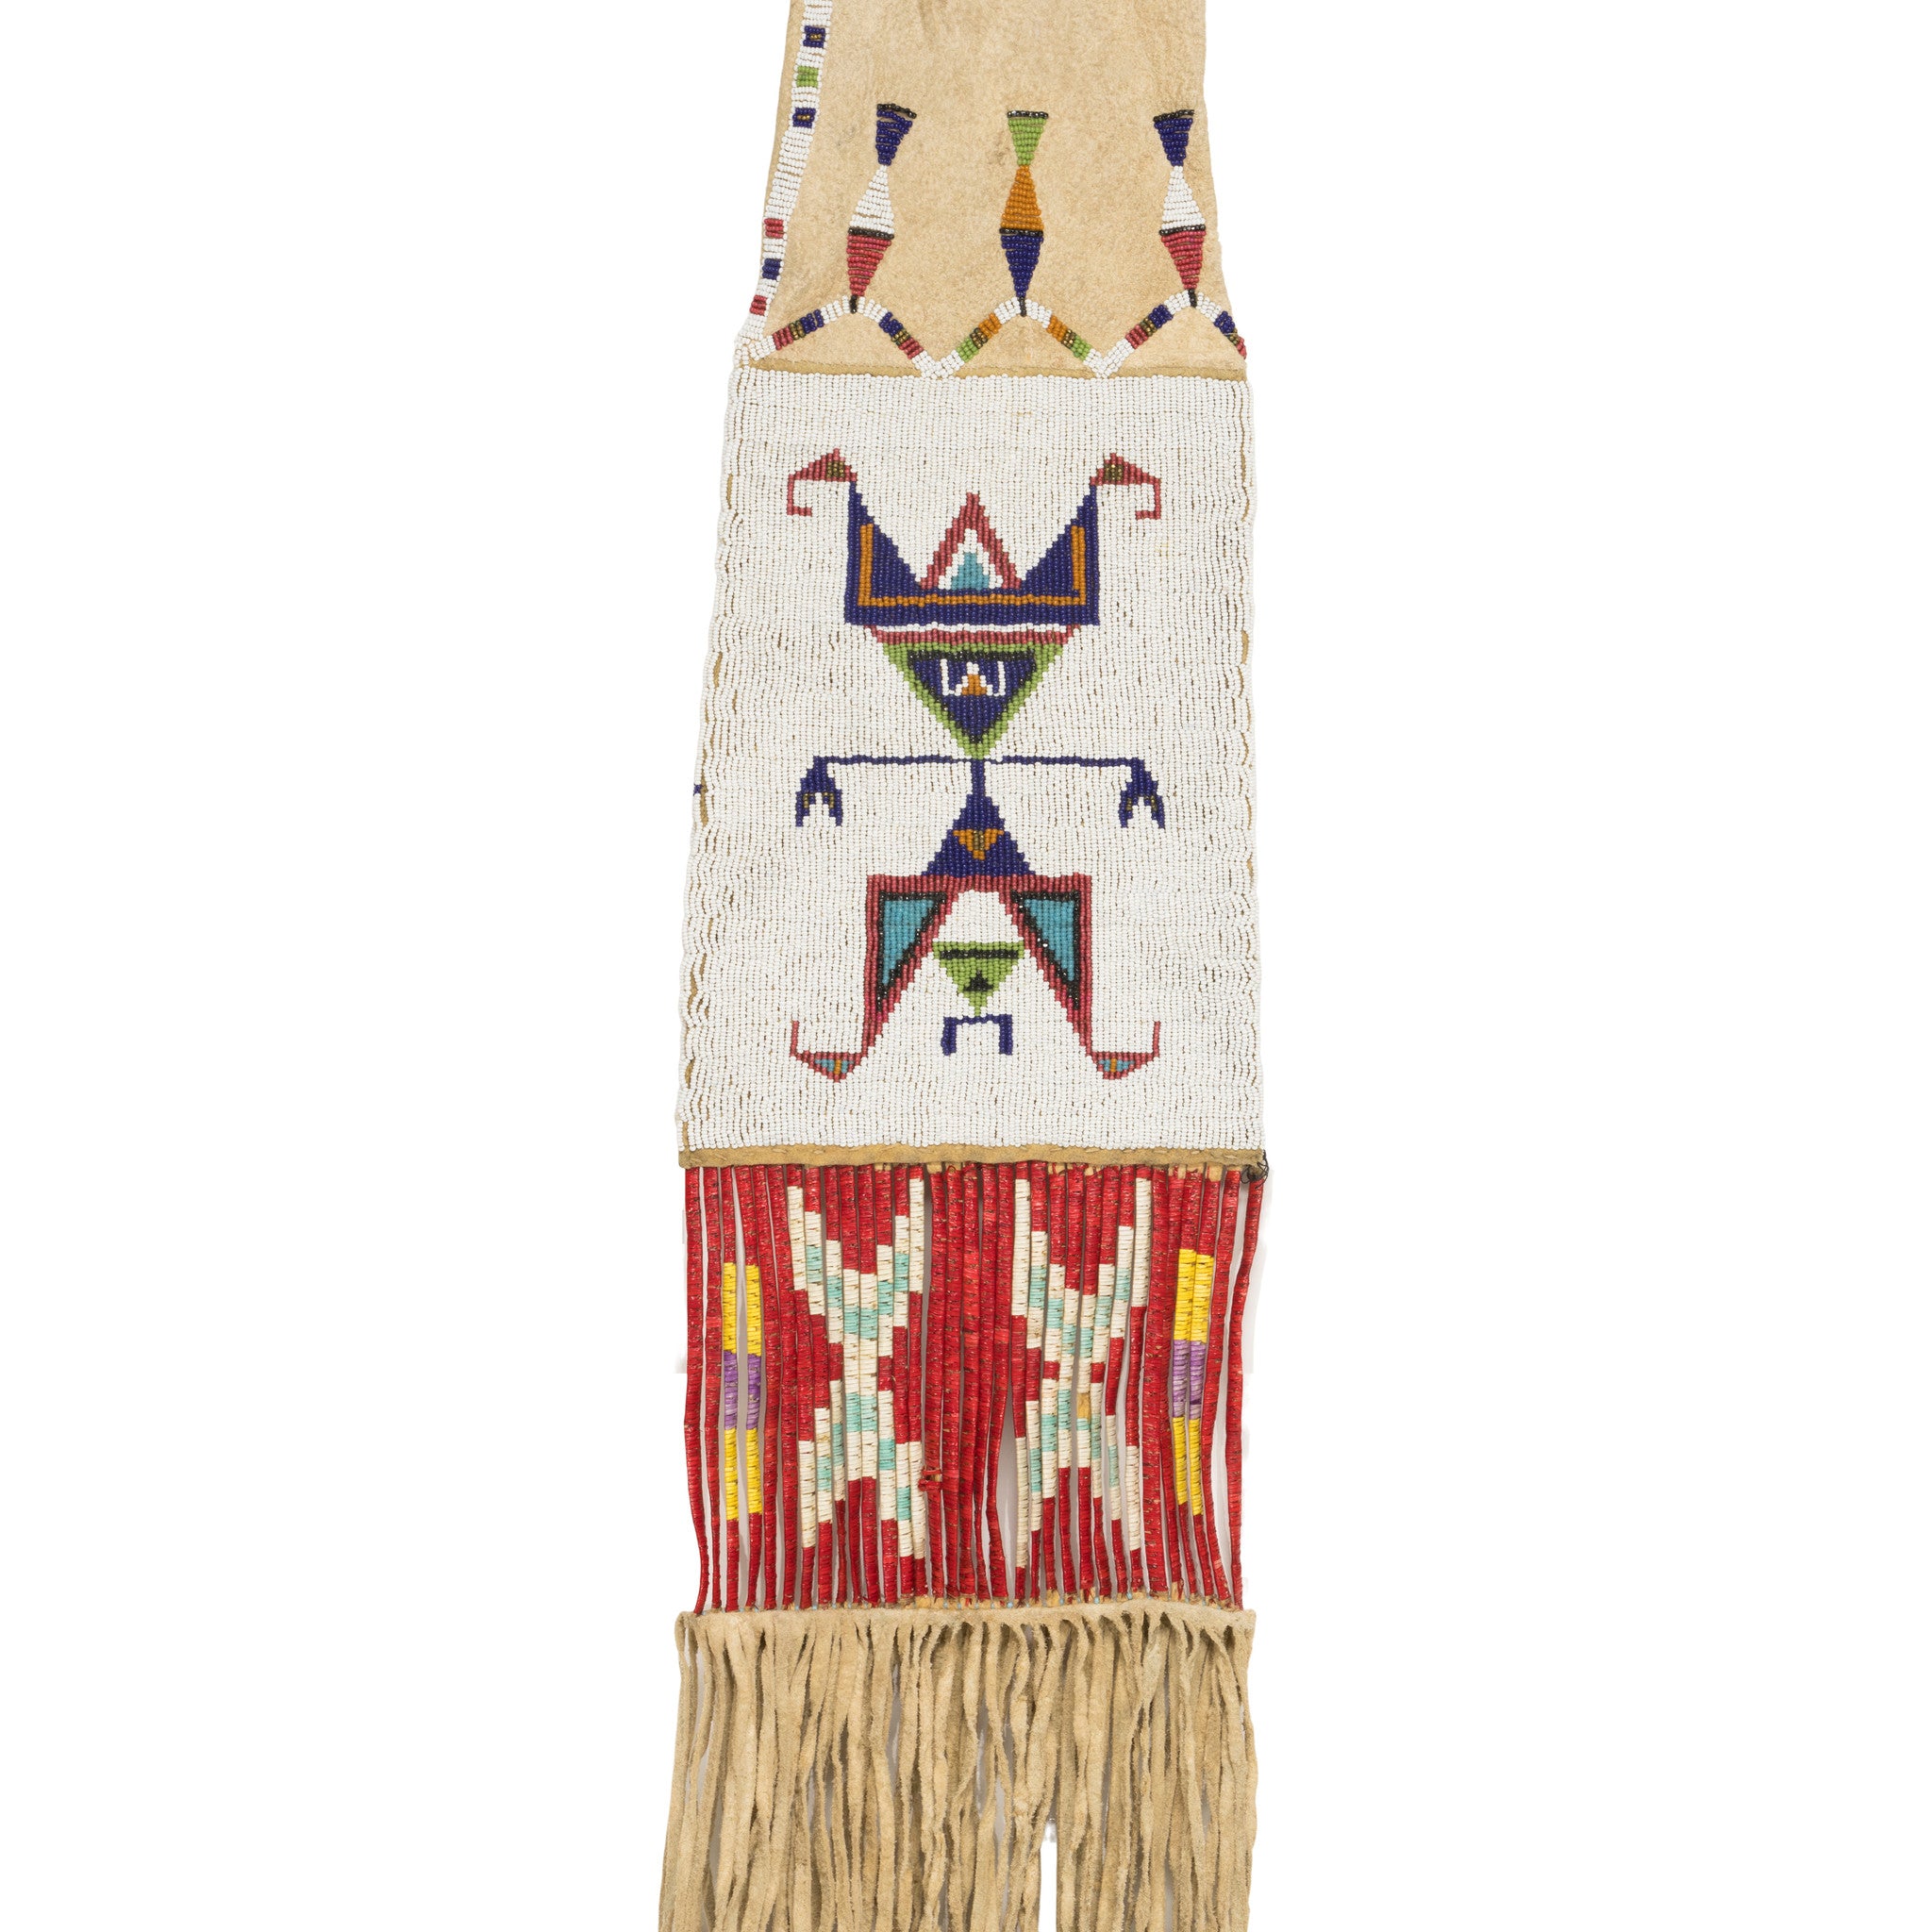 Sioux Beaded Pipe Bag